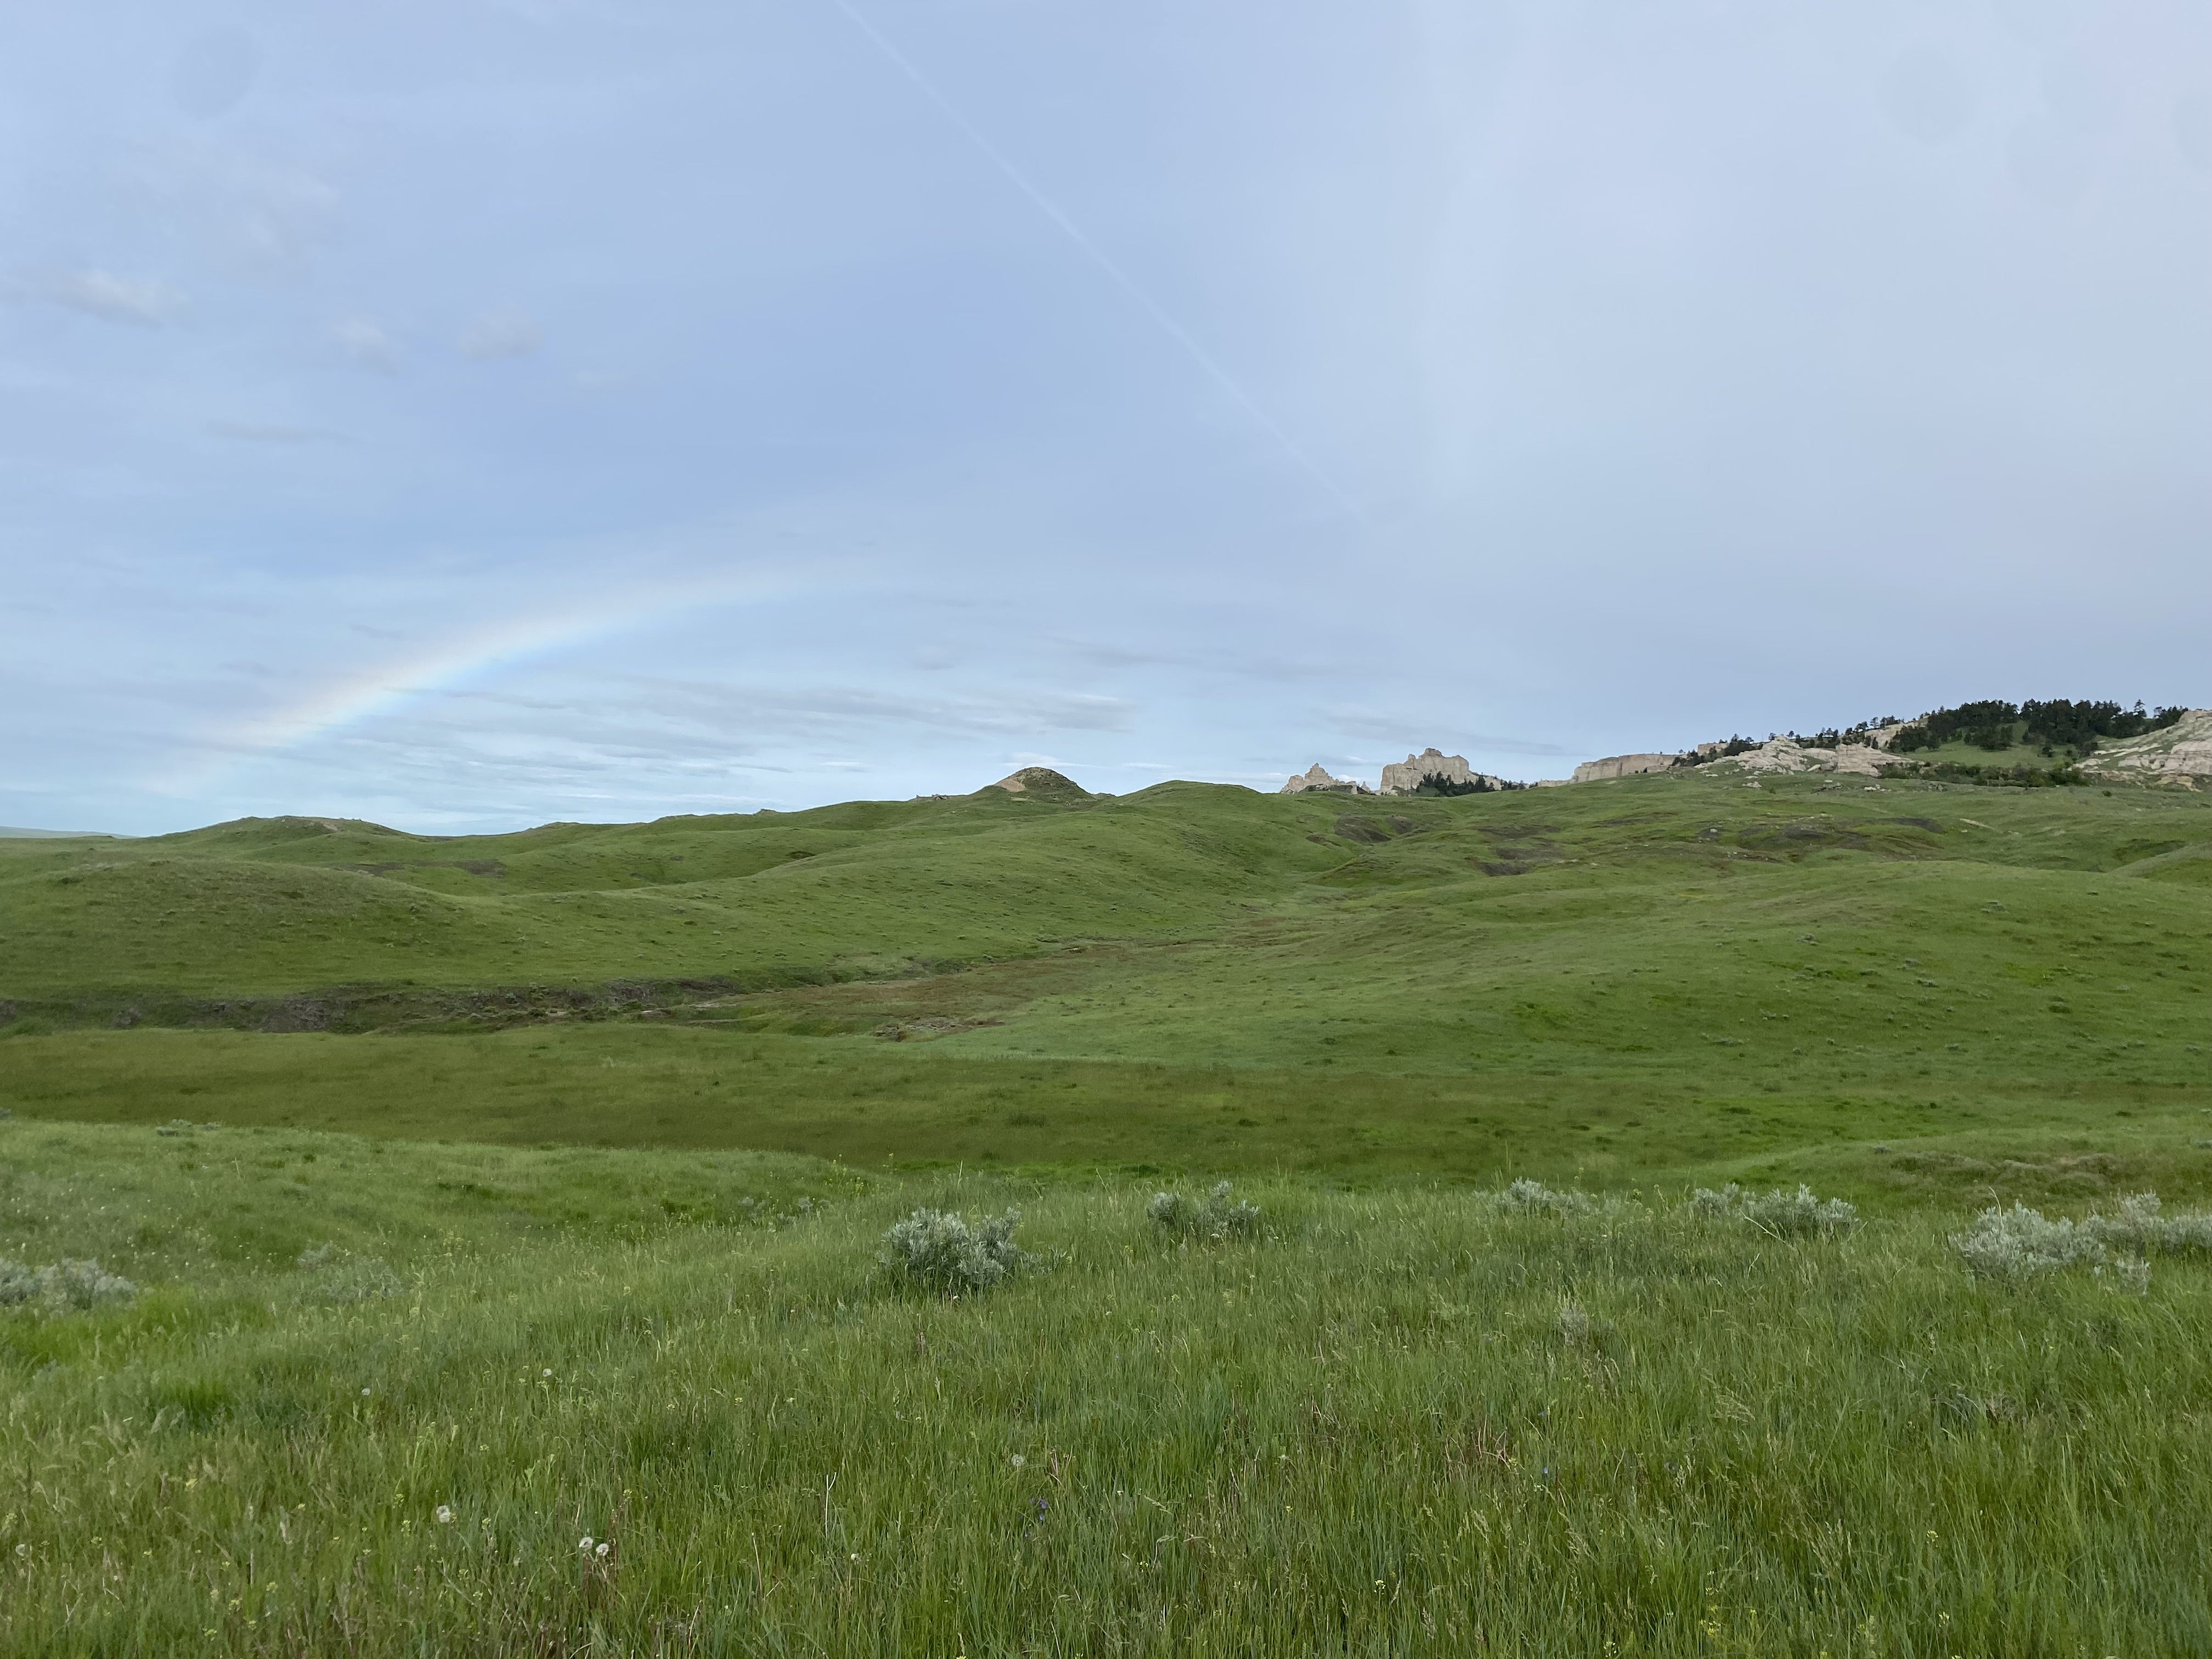 image shows a view of bright green grasslands and rolling hills. In the distance are some rocky outcrops. The sky is blue with a hint of a rainbow arching on the horizon